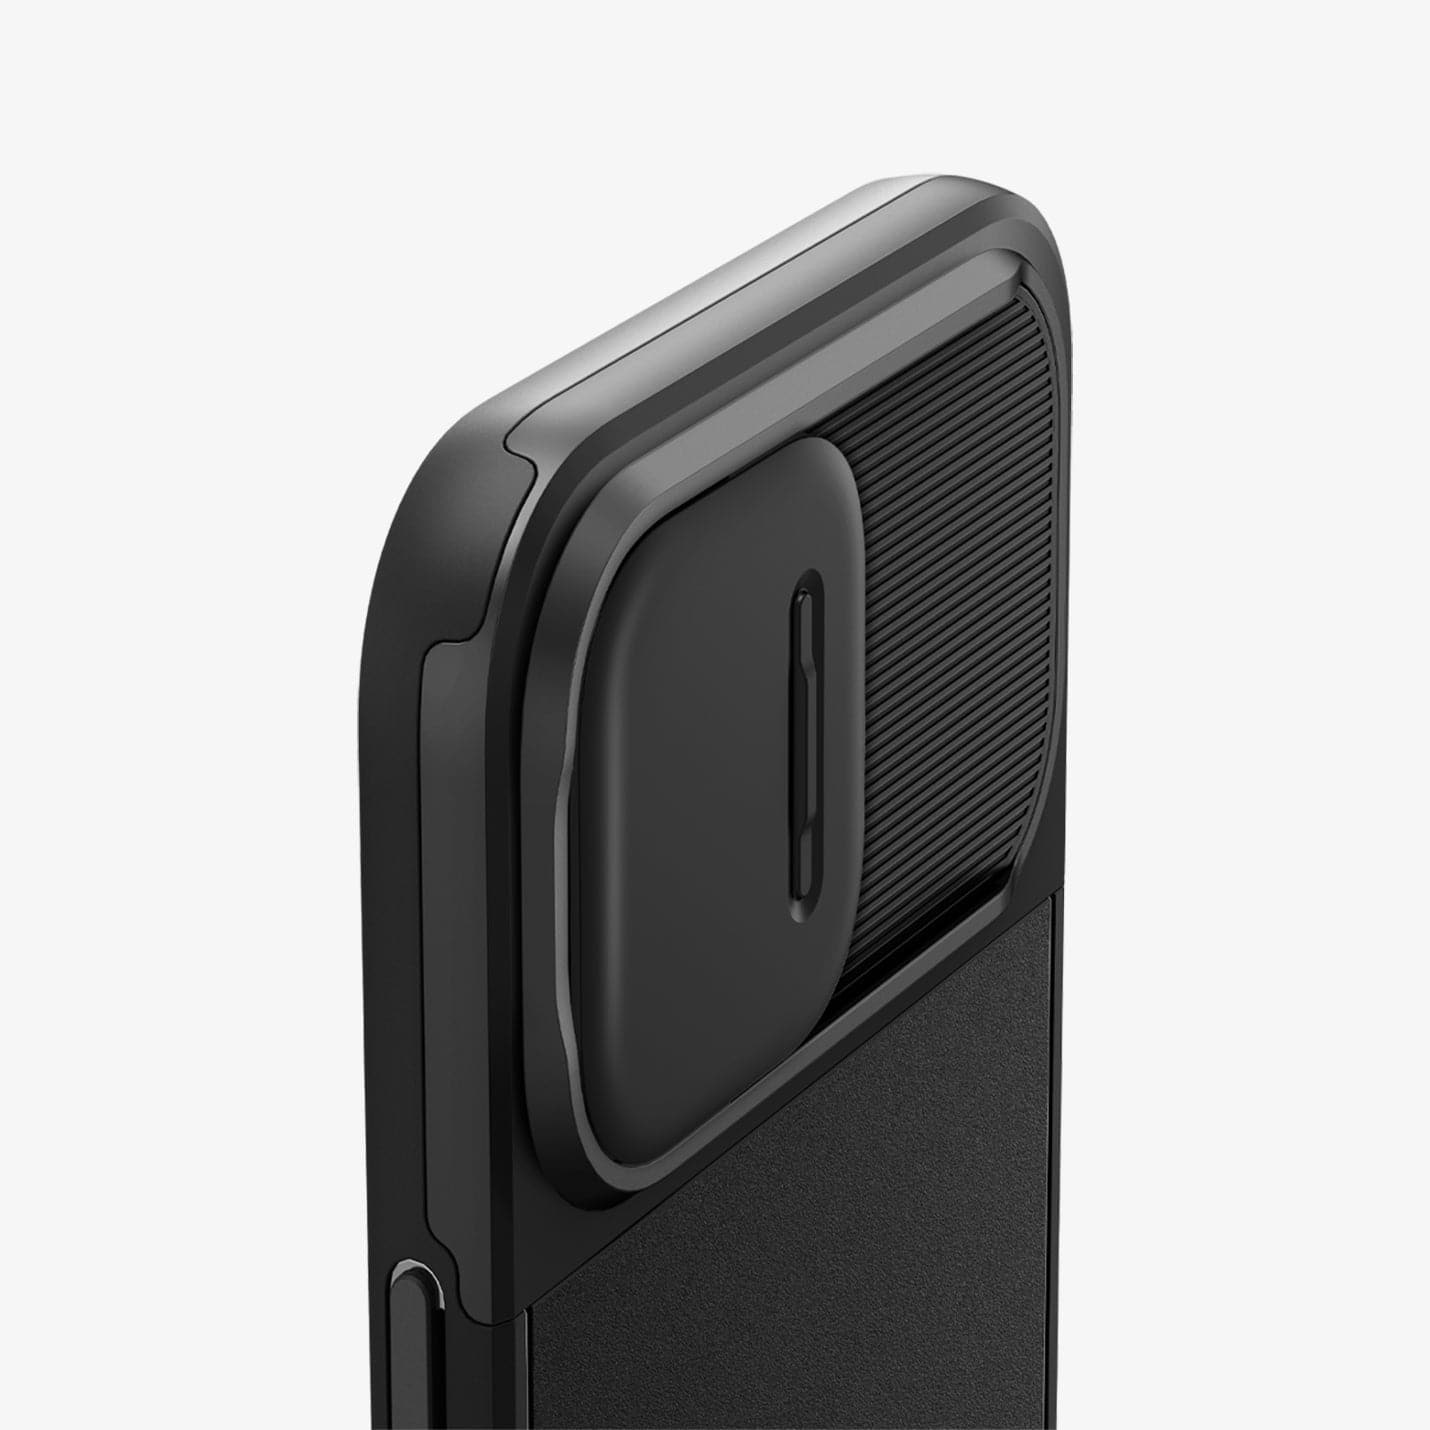 ACS04848 - iPhone 14 Pro Max Case Optik Armor (MagFit) in black showing the back, top and side zoomed in on camera lens with optik lens slot closed